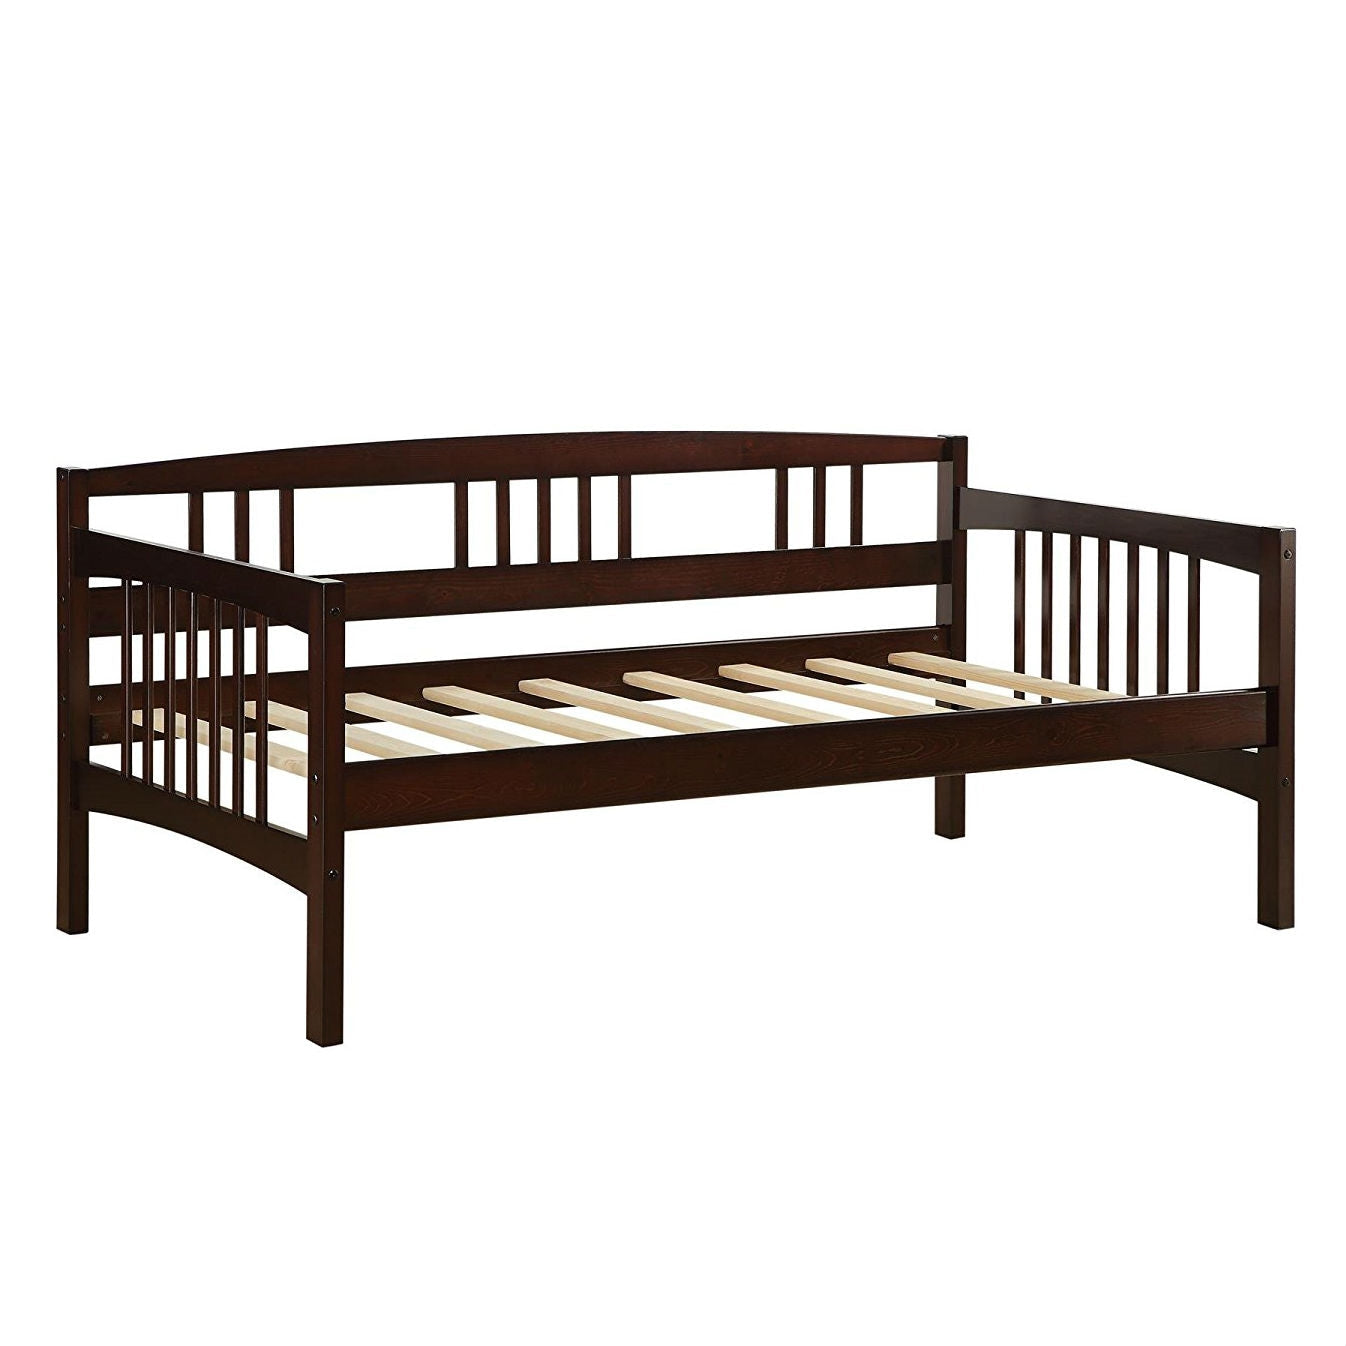 Bedroom > Bed Frames > Daybeds - Twin Size Day Bed In Espresso Wood Finish - Trundle Not Included